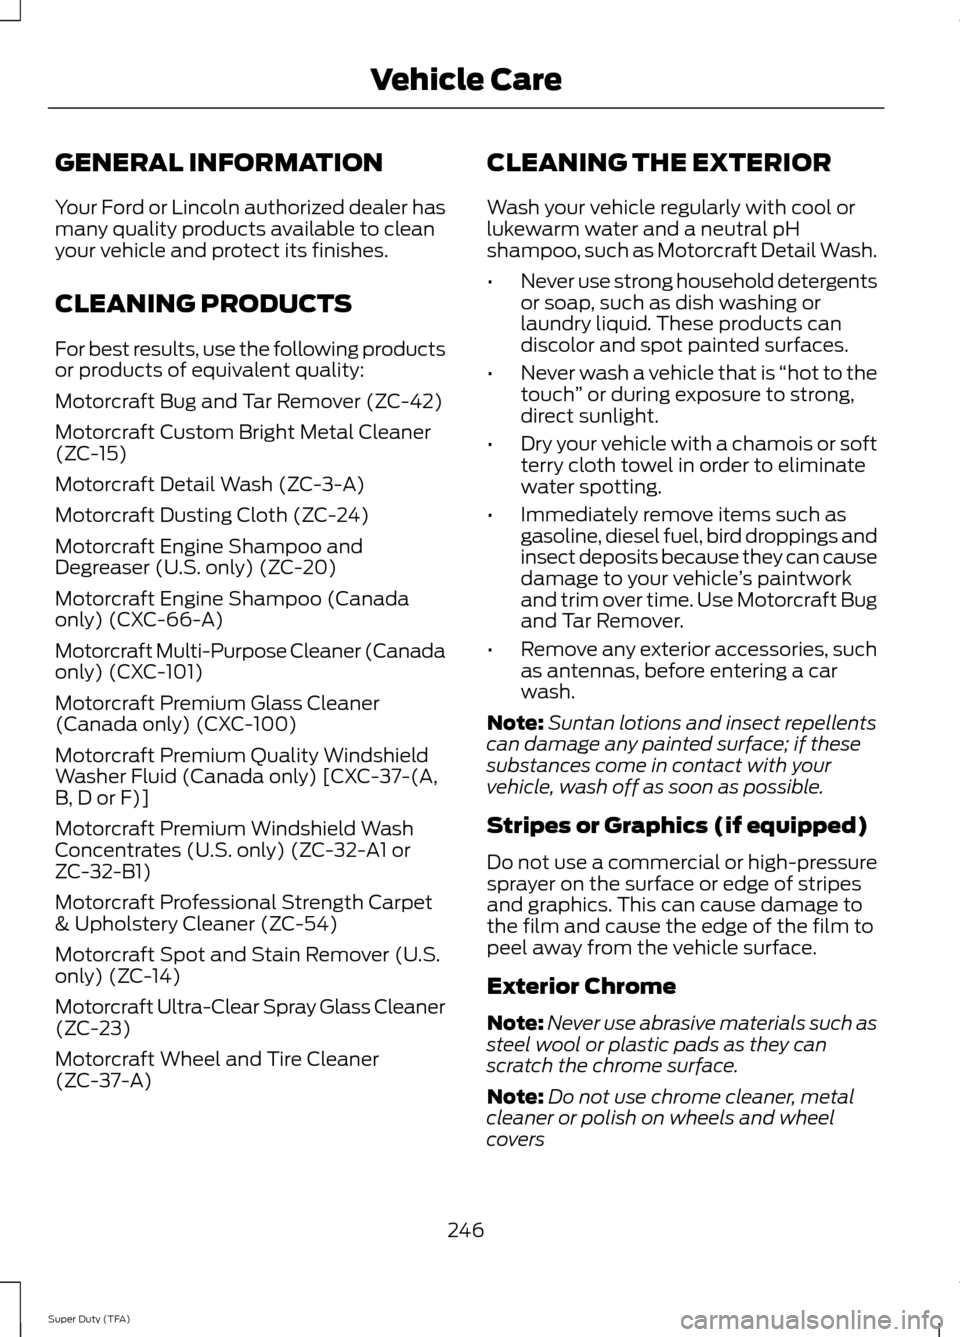 FORD SUPER DUTY 2014 3.G Owners Manual GENERAL INFORMATION
Your Ford or Lincoln authorized dealer has
many quality products available to clean
your vehicle and protect its finishes.
CLEANING PRODUCTS
For best results, use the following pro